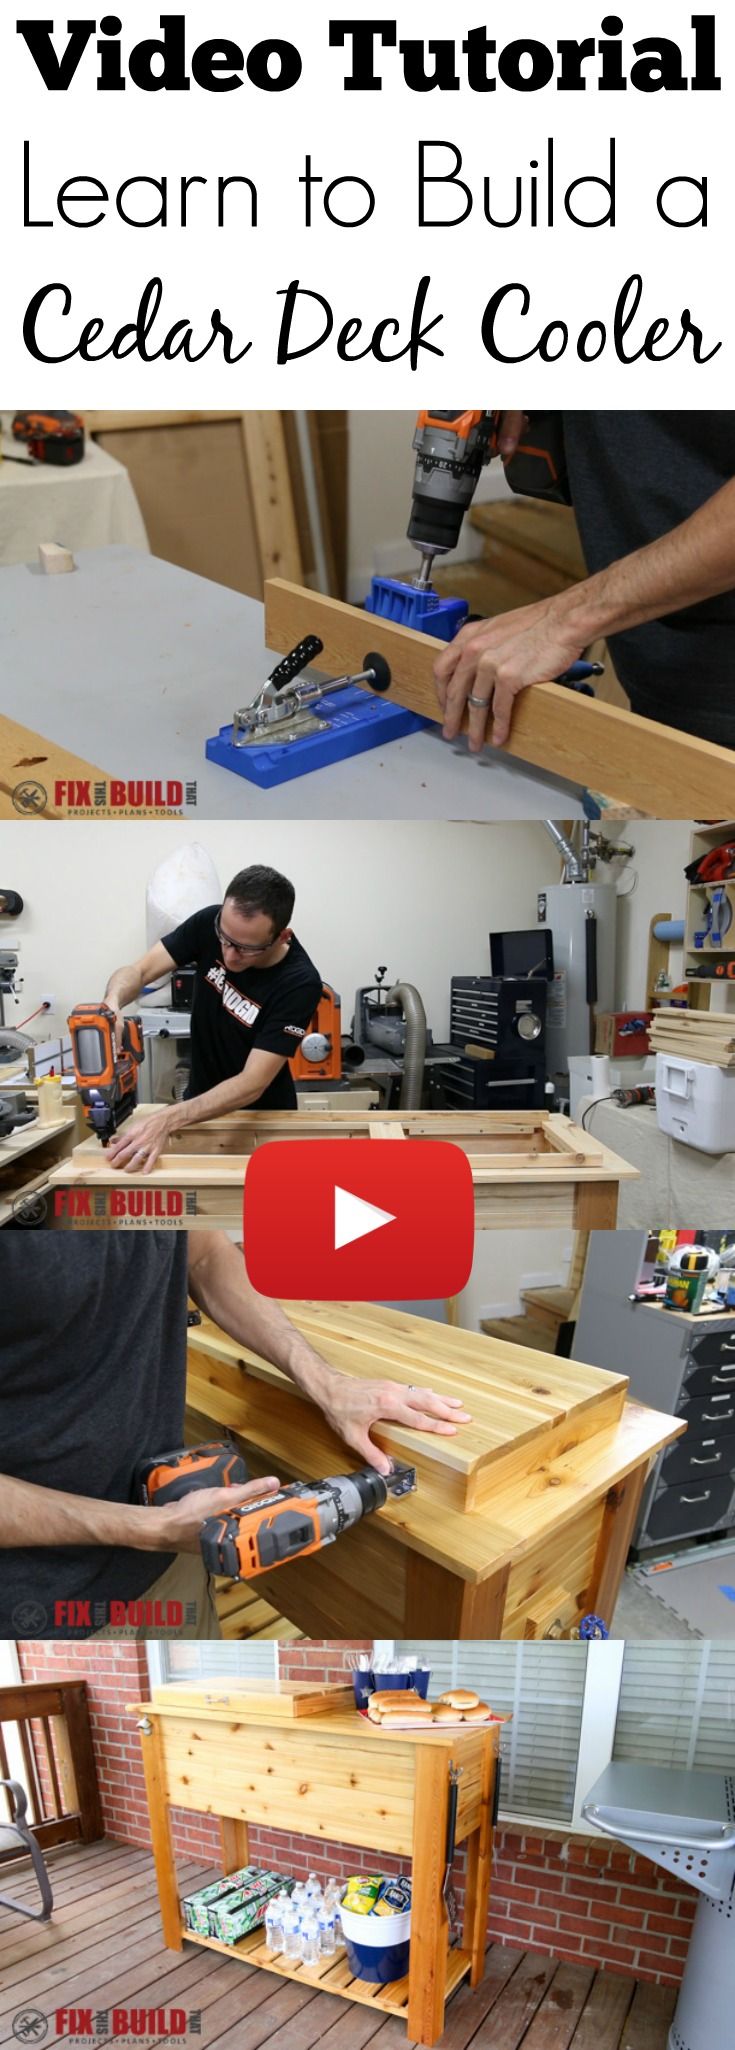 Full video build tutorial on how to build a Cedar Deck Cooler.  This ice box wil...